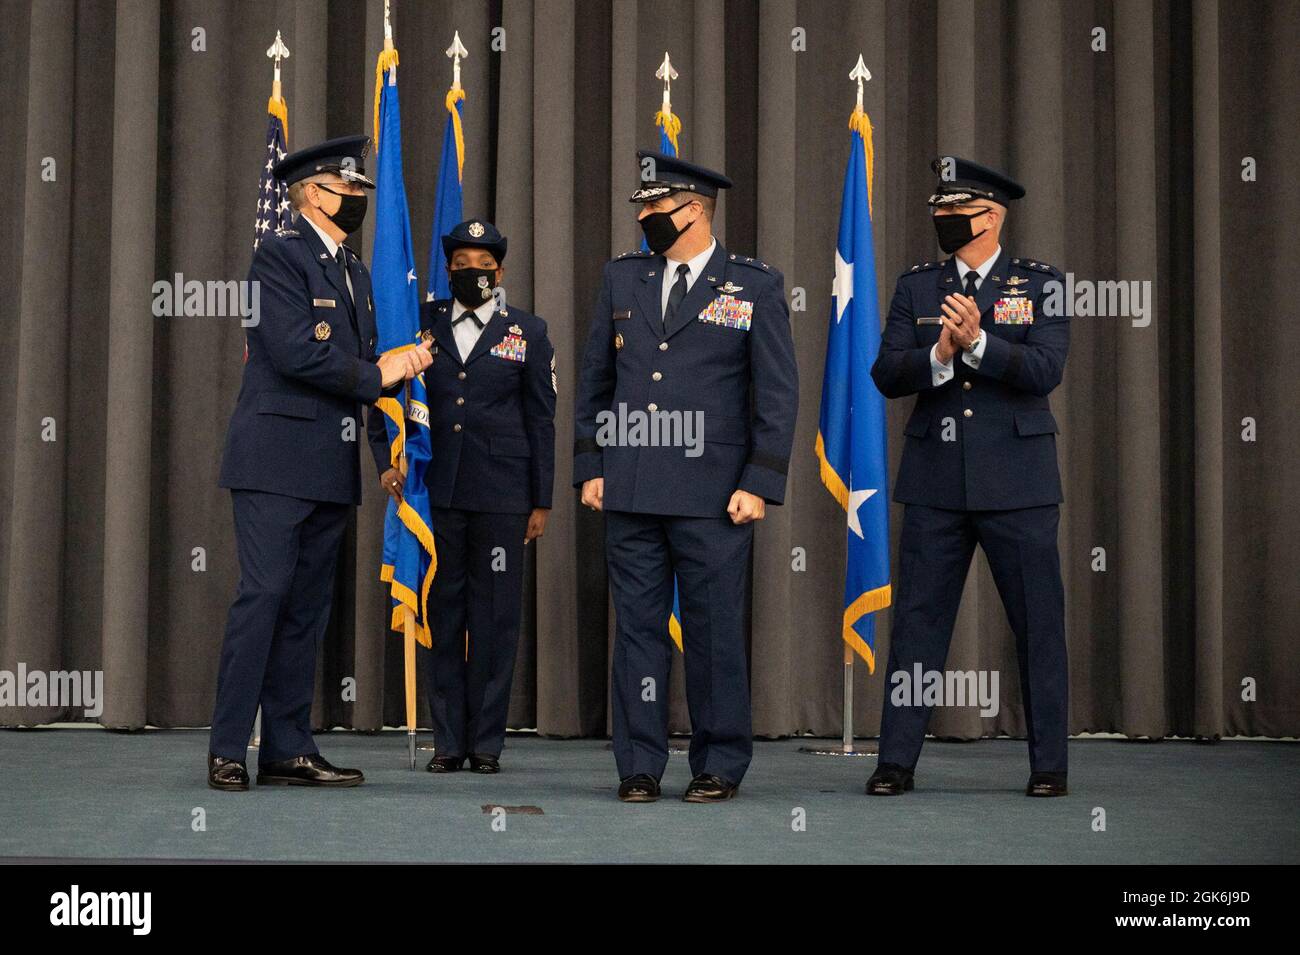 Gen. Tim Ray, left, commander of Air Force Global Strike Command, and Lt. Gen. (select) Mark Weatherington, right, outgoing 8th Air Force and Joint-Global Strike Operations Center commander applaud Maj. Gen. Andrew Gebara, incoming 8th Air Force and J-GSOC commander during a change of command ceremony at Barksdale Air Force Base, La., August 16, 2021. A change of command is a military tradition that represents a formal transfer of authority and responsibility for a unit from one commanding or flag officer to another. Stock Photo